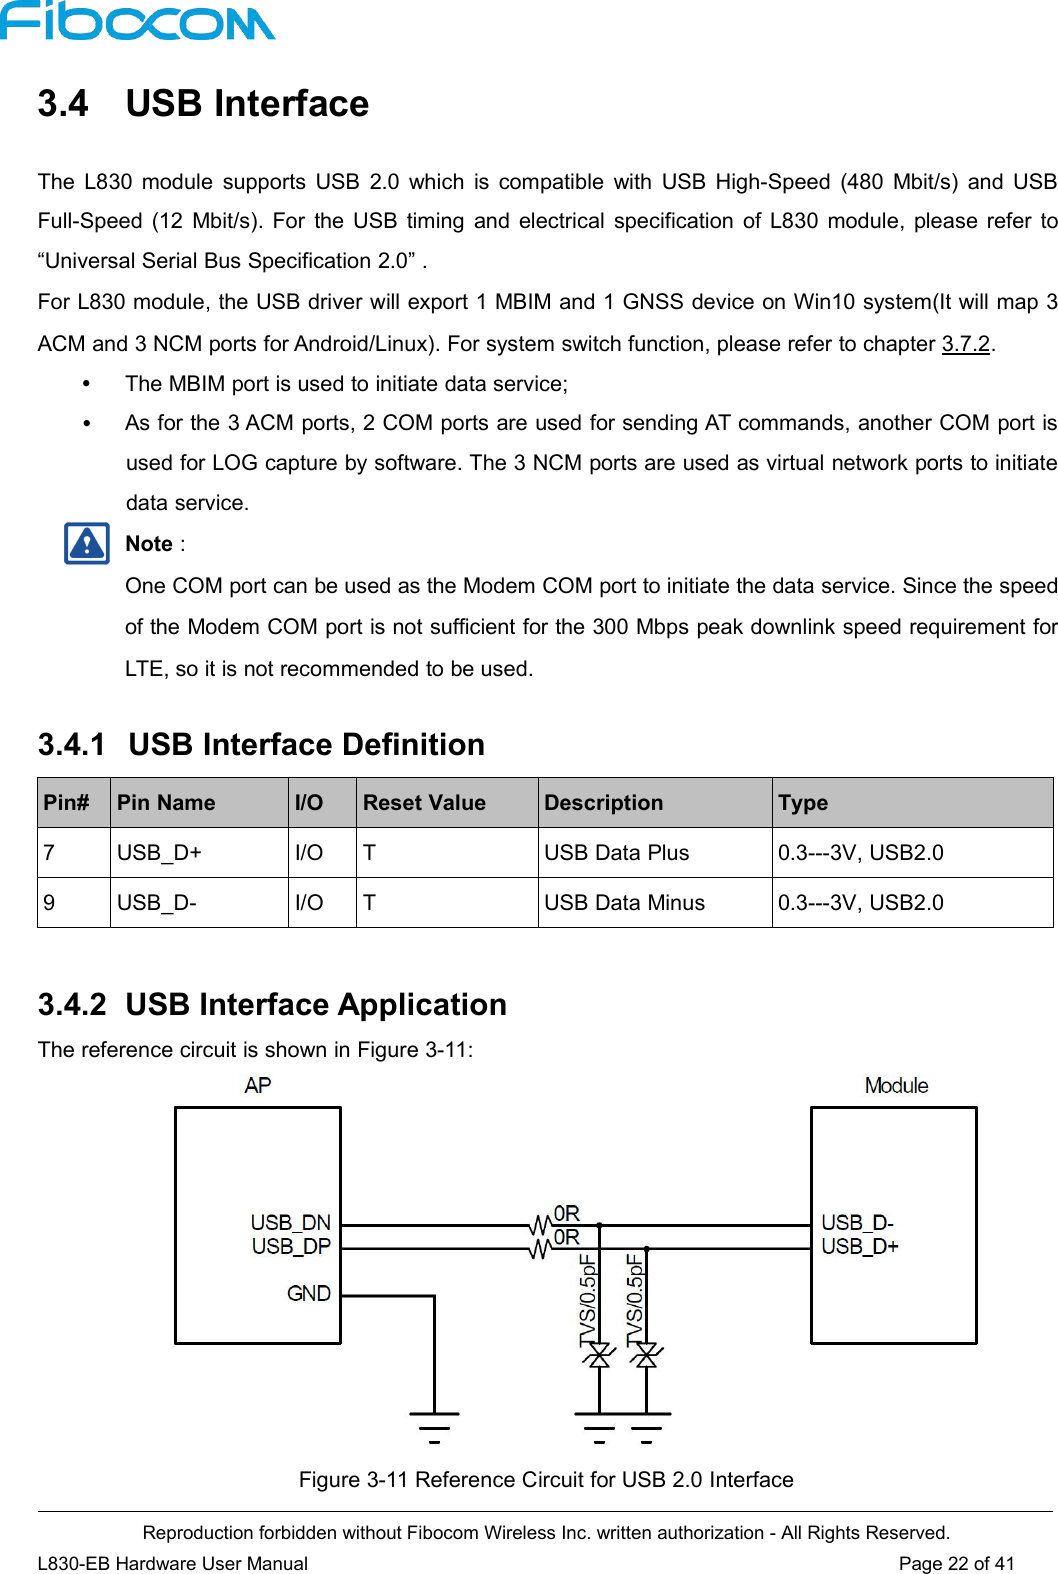 Reproduction forbidden without Fibocom Wireless Inc. written authorization - All Rights Reserved.L830-EB Hardware User Manual Page 22 of 413.4 USB InterfaceThe L830 module supports USB 2.0 which is compatible with USB High-Speed (480 Mbit/s) and USBFull-Speed (12 Mbit/s). For the USB timing and electrical specification of L830 module, please refer to“Universal Serial Bus Specification 2.0” .For L830 module, the USB driver will export 1 MBIM and 1 GNSS device on Win10 system(It will map 3ACM and 3 NCM ports for Android/Linux). For system switch function, please refer to chapter 3.7.2.The MBIM port is used to initiate data service;As for the 3 ACM ports, 2 COM ports are used for sending AT commands, another COM port isused for LOG capture by software. The 3 NCM ports are used as virtual network ports to initiatedata service.Note :One COM port can be used as the Modem COM port to initiate the data service. Since the speedof the Modem COM port is not sufficient for the 300 Mbps peak downlink speed requirement forLTE, so it is not recommended to be used.3.4.1 USB Interface DefinitionPin#Pin NameI/OReset ValueDescriptionType7USB_D+I/OTUSB Data Plus0.3---3V, USB2.09USB_D-I/OTUSB Data Minus0.3---3V, USB2.03.4.2 USB Interface ApplicationThe reference circuit is shown in Figure 3-11:Figure 3-11 Reference Circuit for USB 2.0 Interface